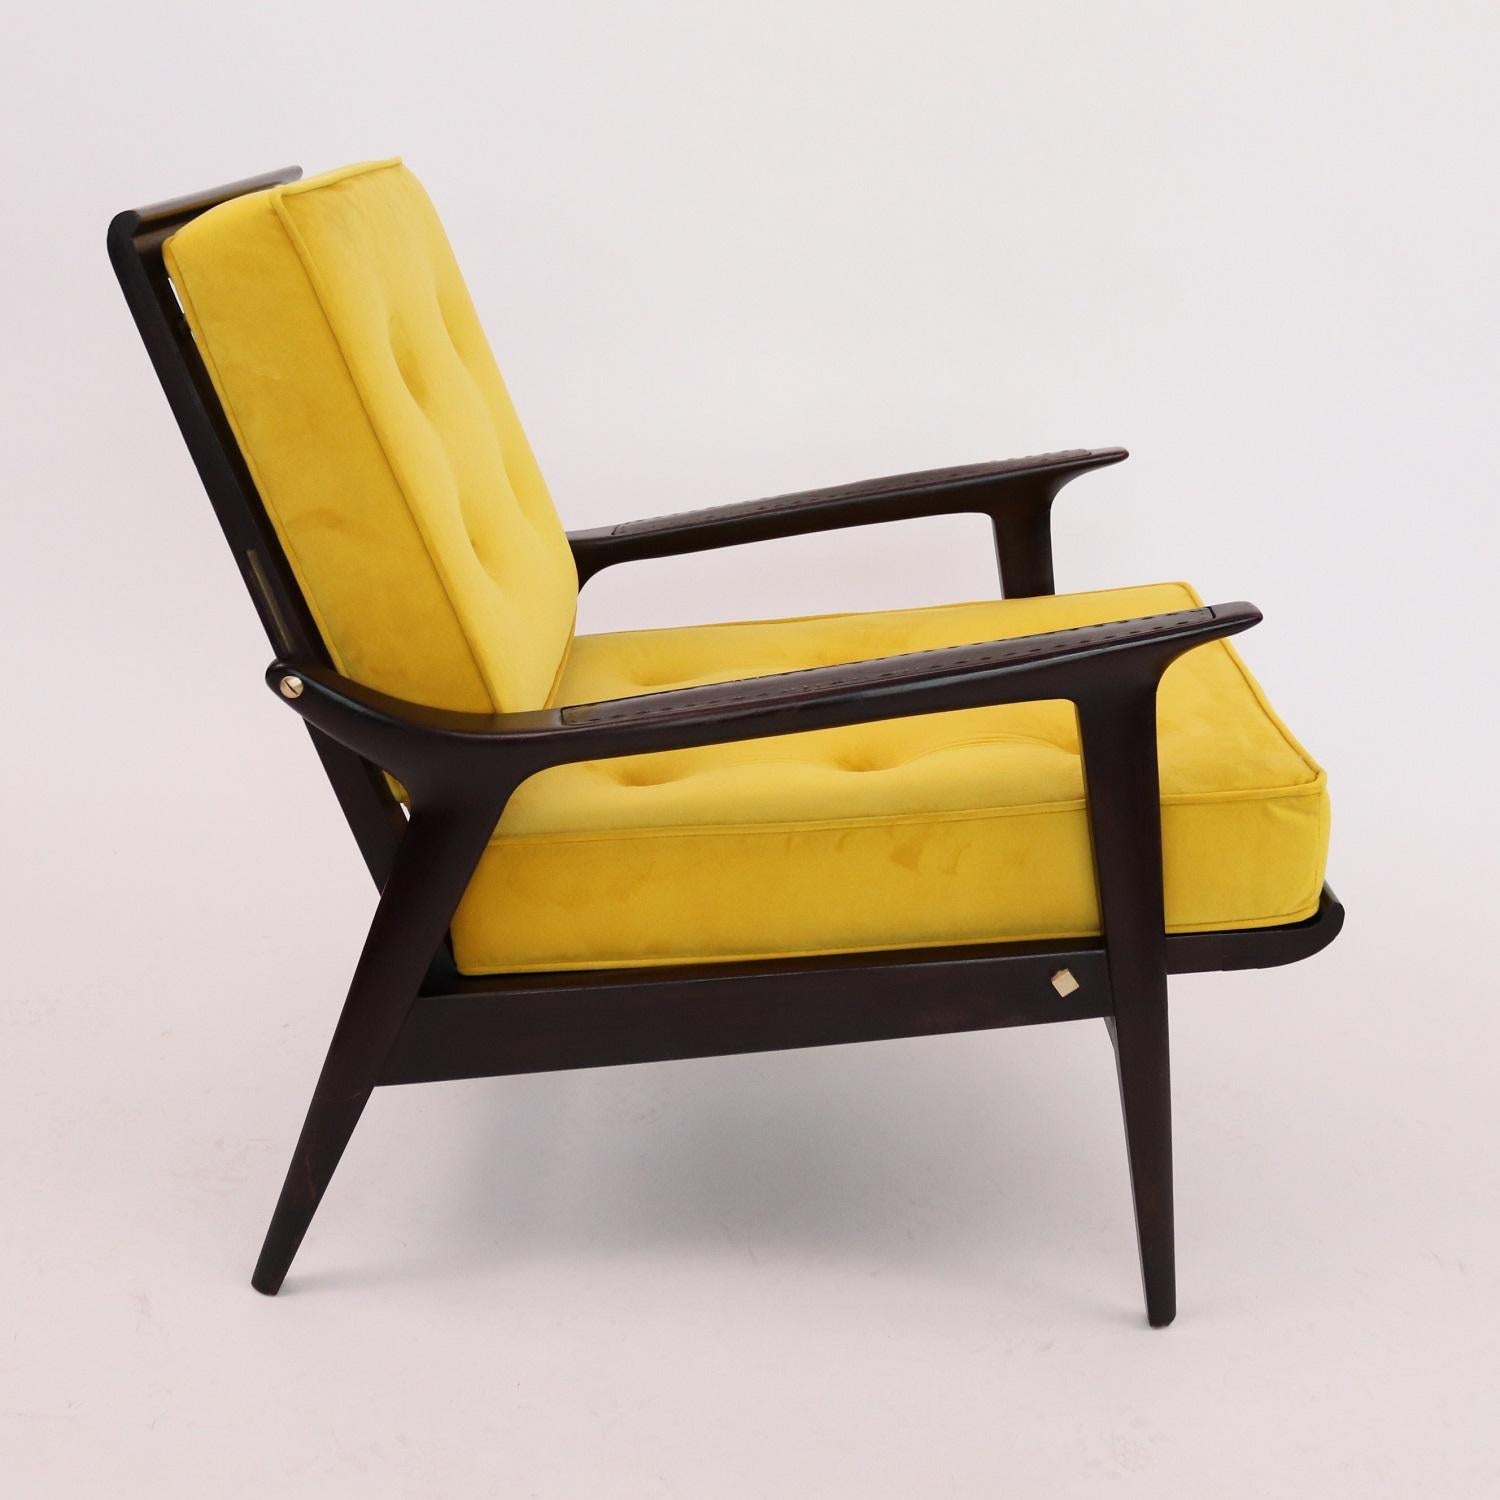 Mid-20th Century Italian Midcentury Recliner Armchair Reupholstered, 1950s